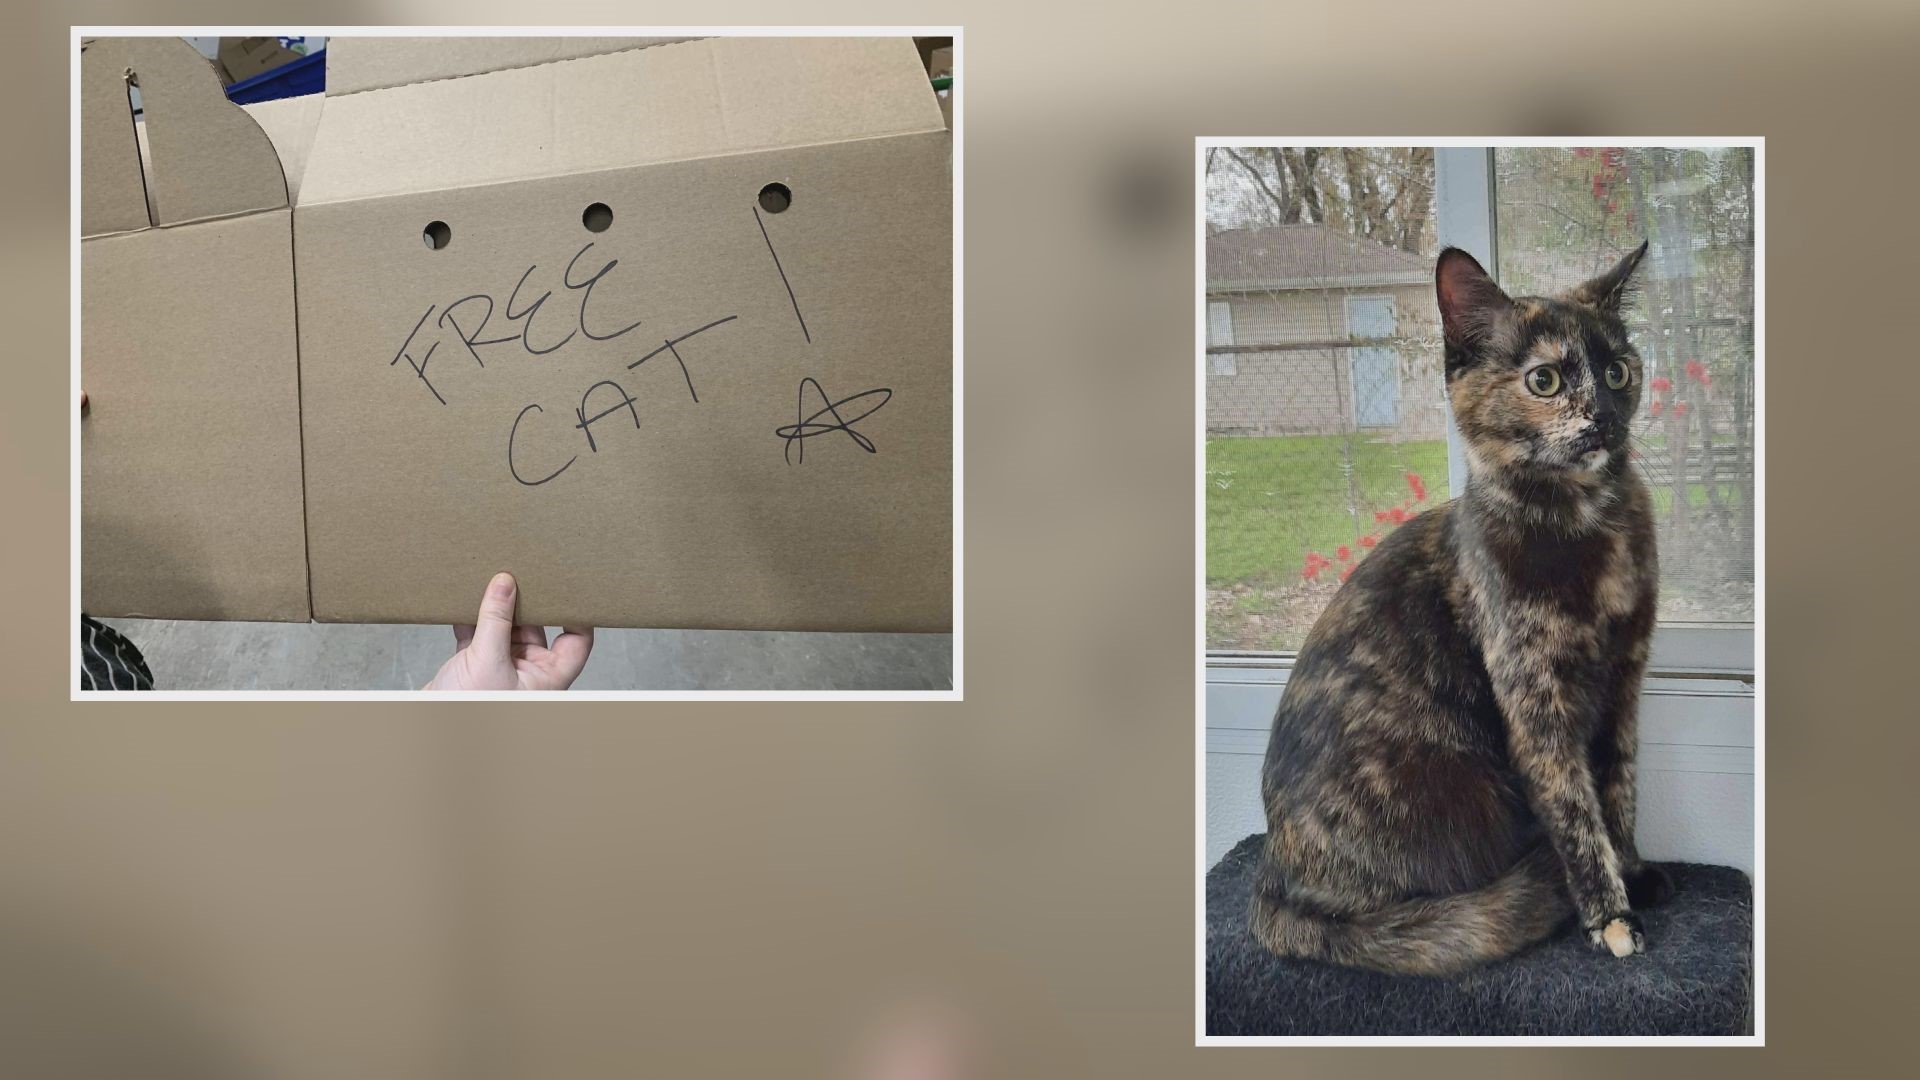 The box had "free cat" and a list of facts written on the side, saying the cat had damaged the previous owner's home.